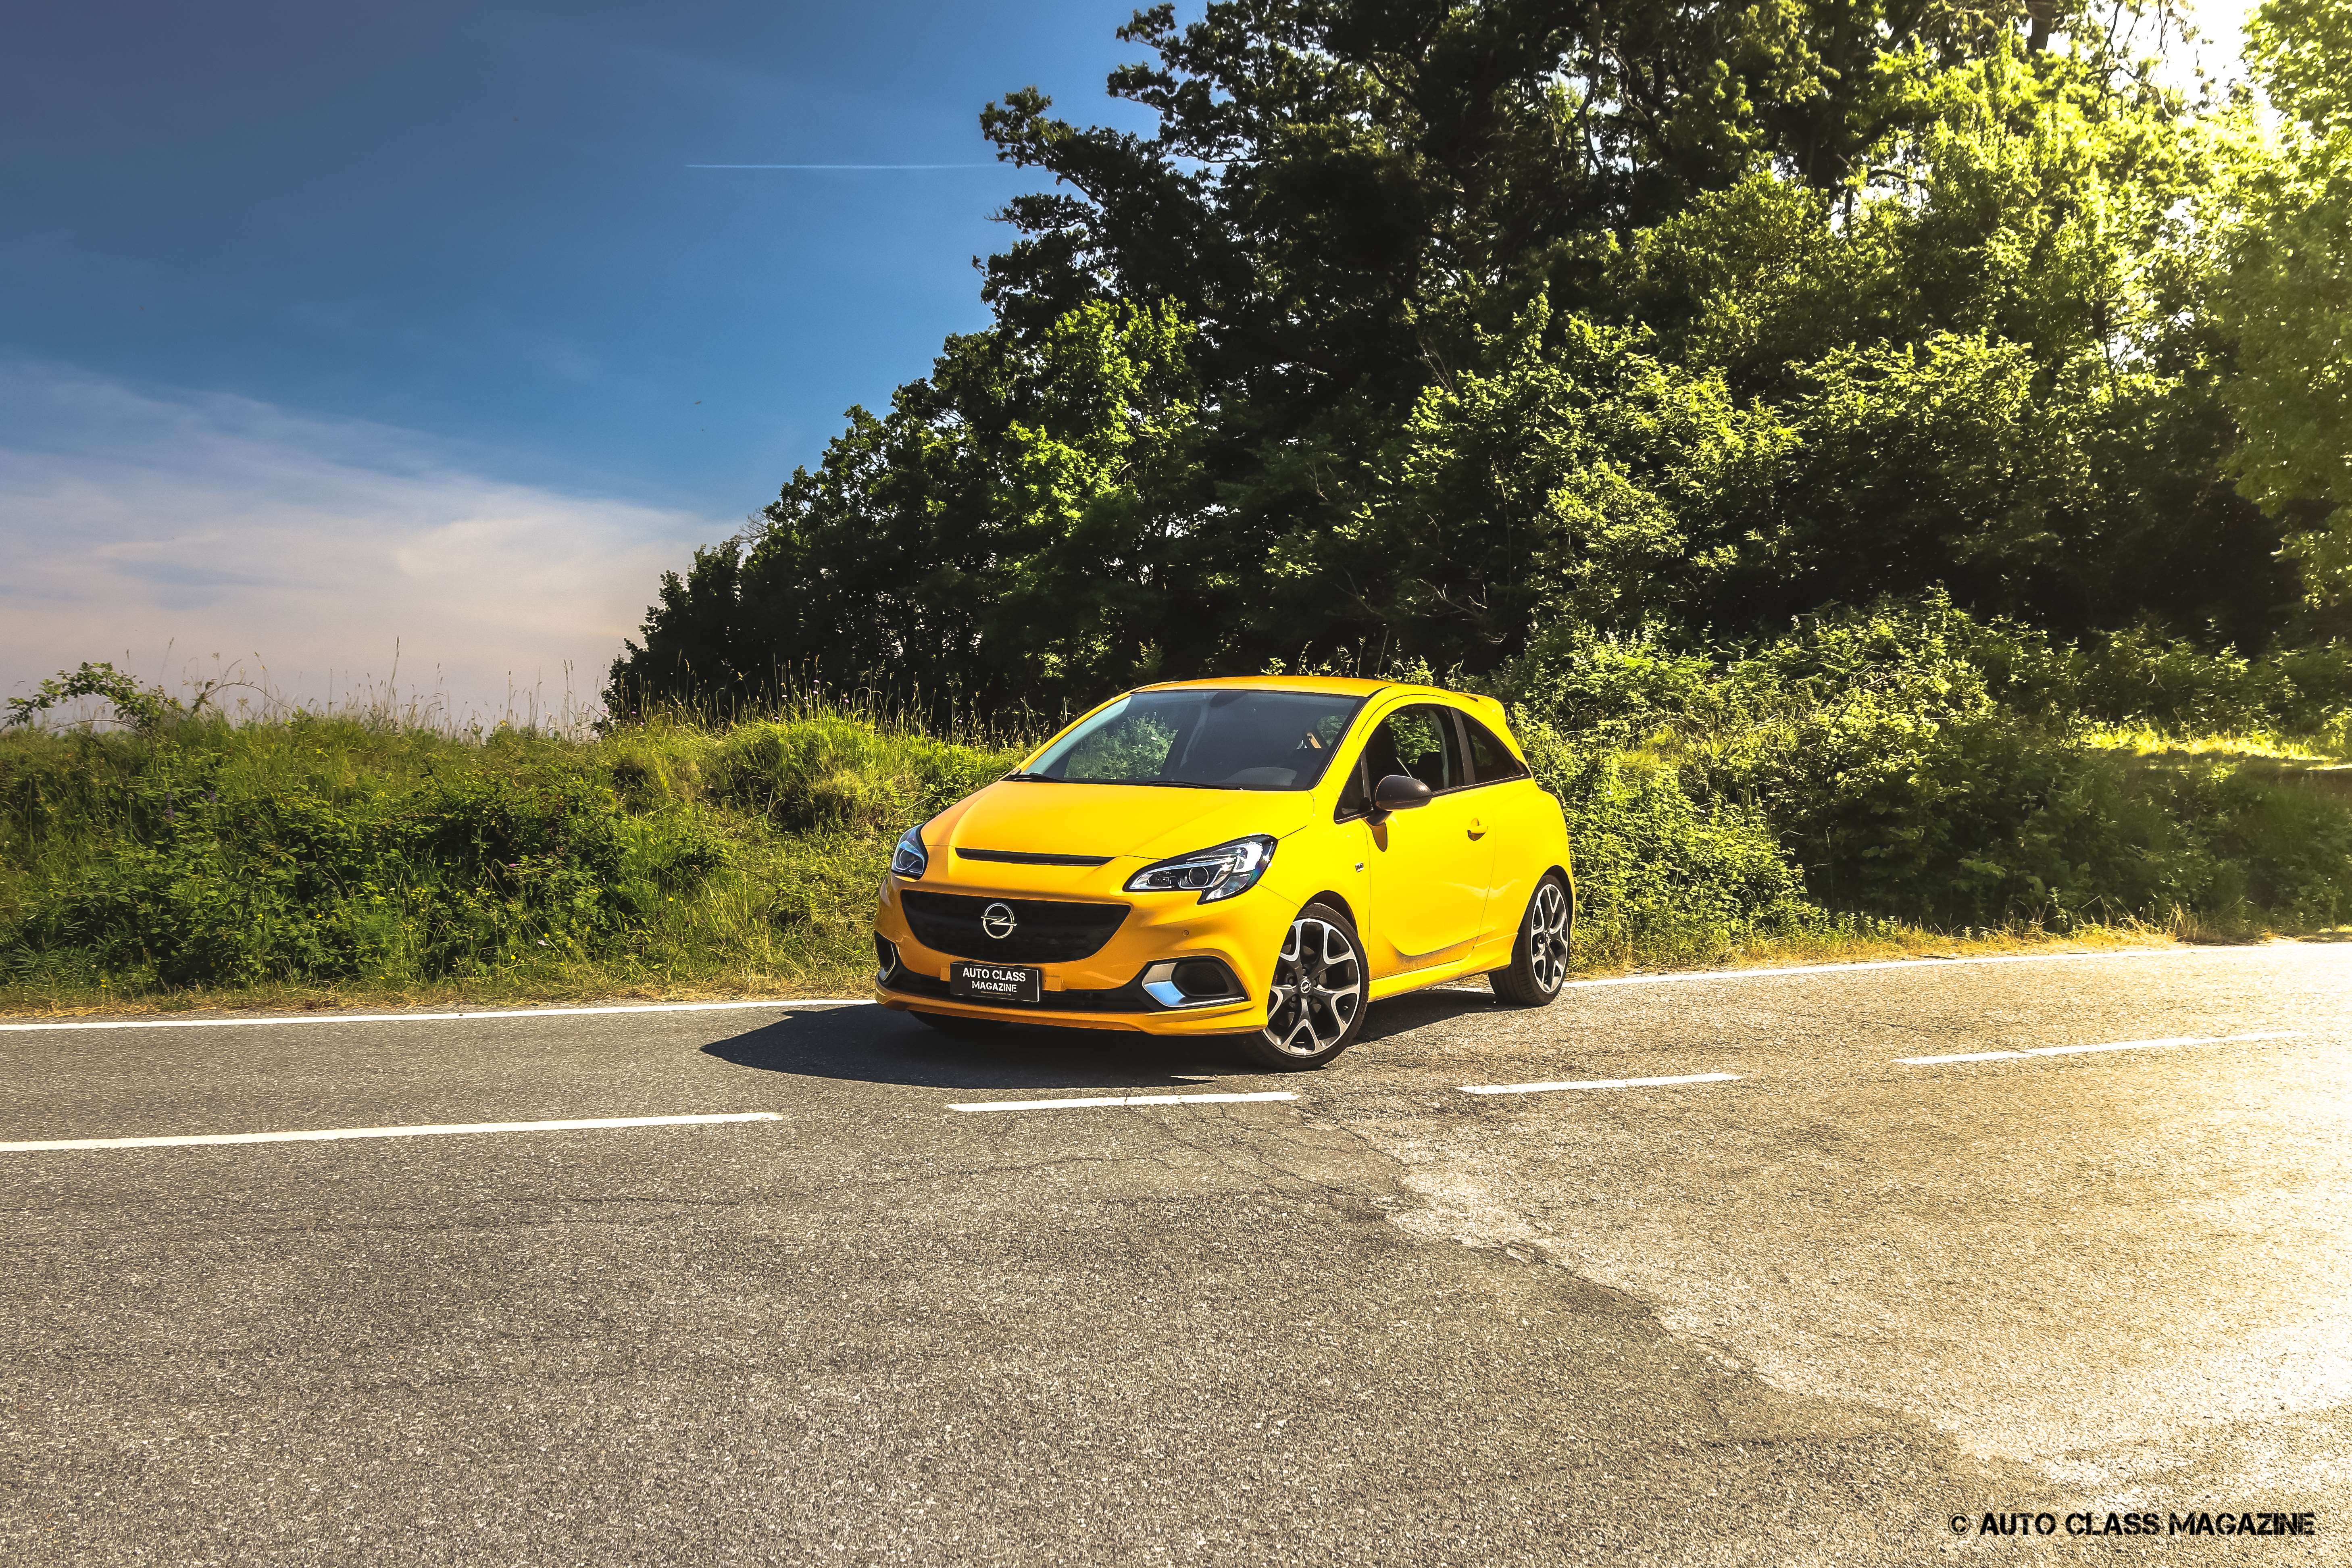 New Yellow Opel Corsa editorial stock image. Image of opel - 120514864